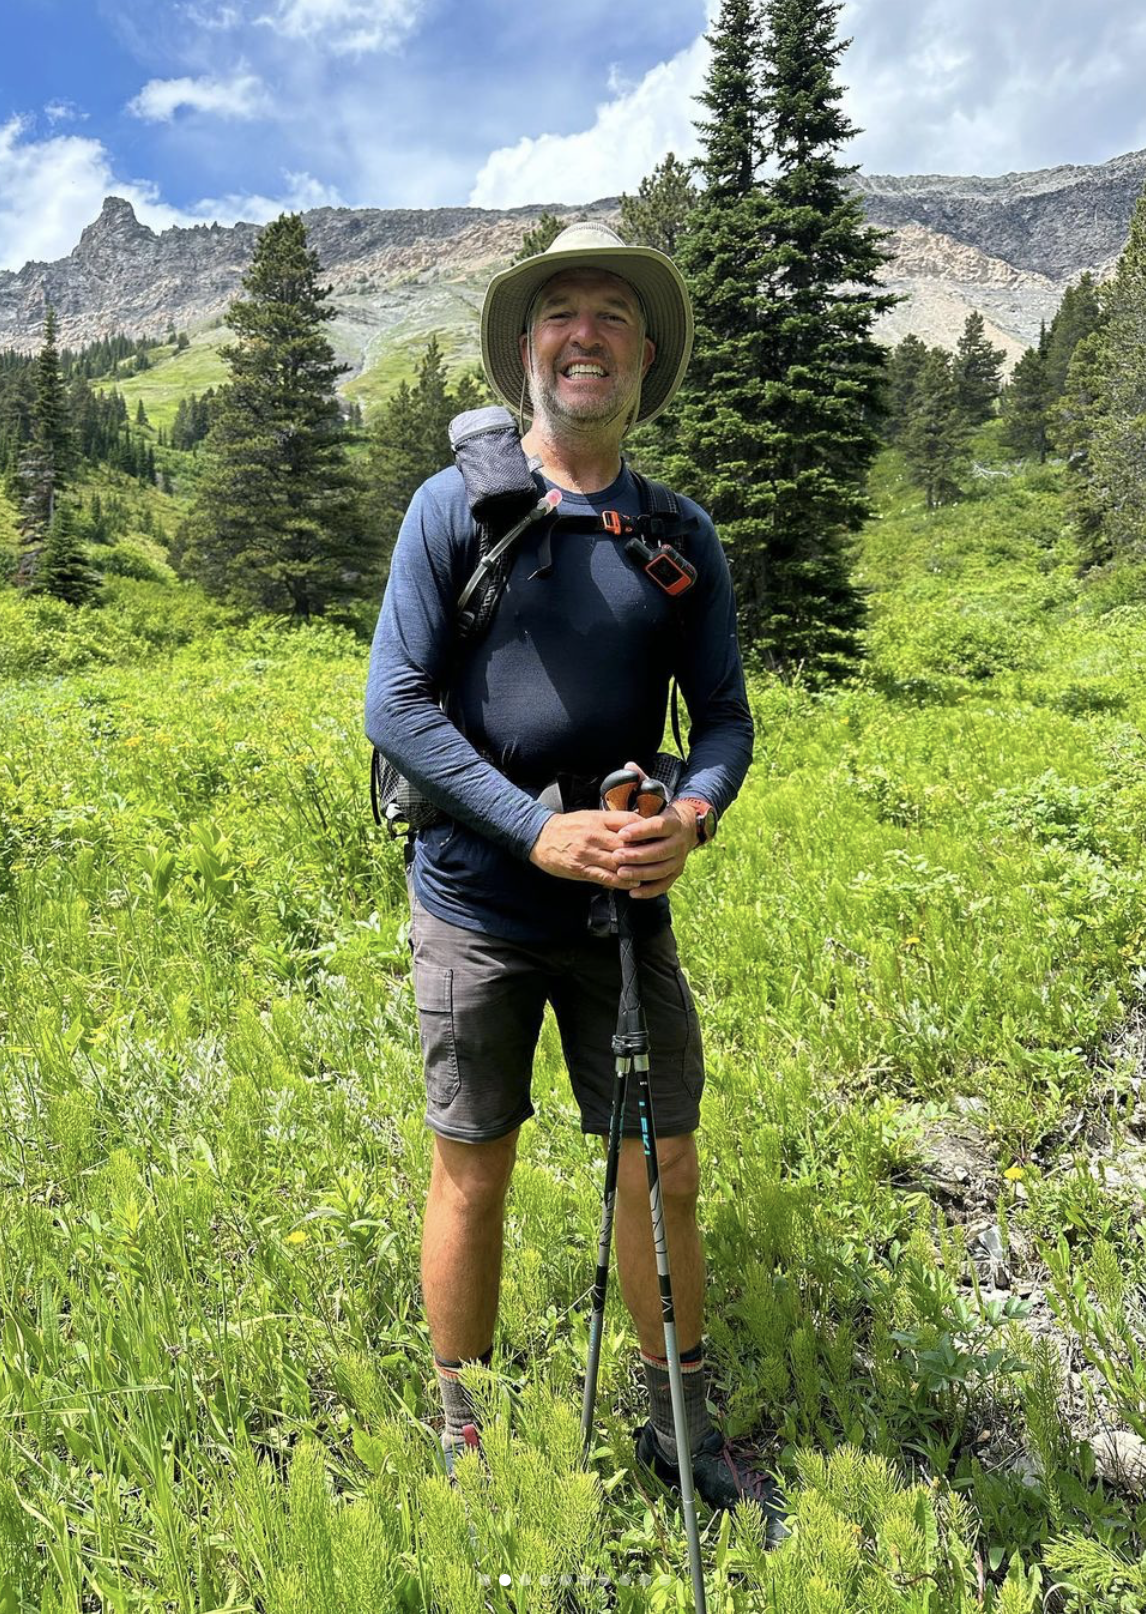 Tom Levee made the 870 mile trek through New Mexico. He continues his journey now moving south from the northern-most point of the CDT in Glacier National Park.